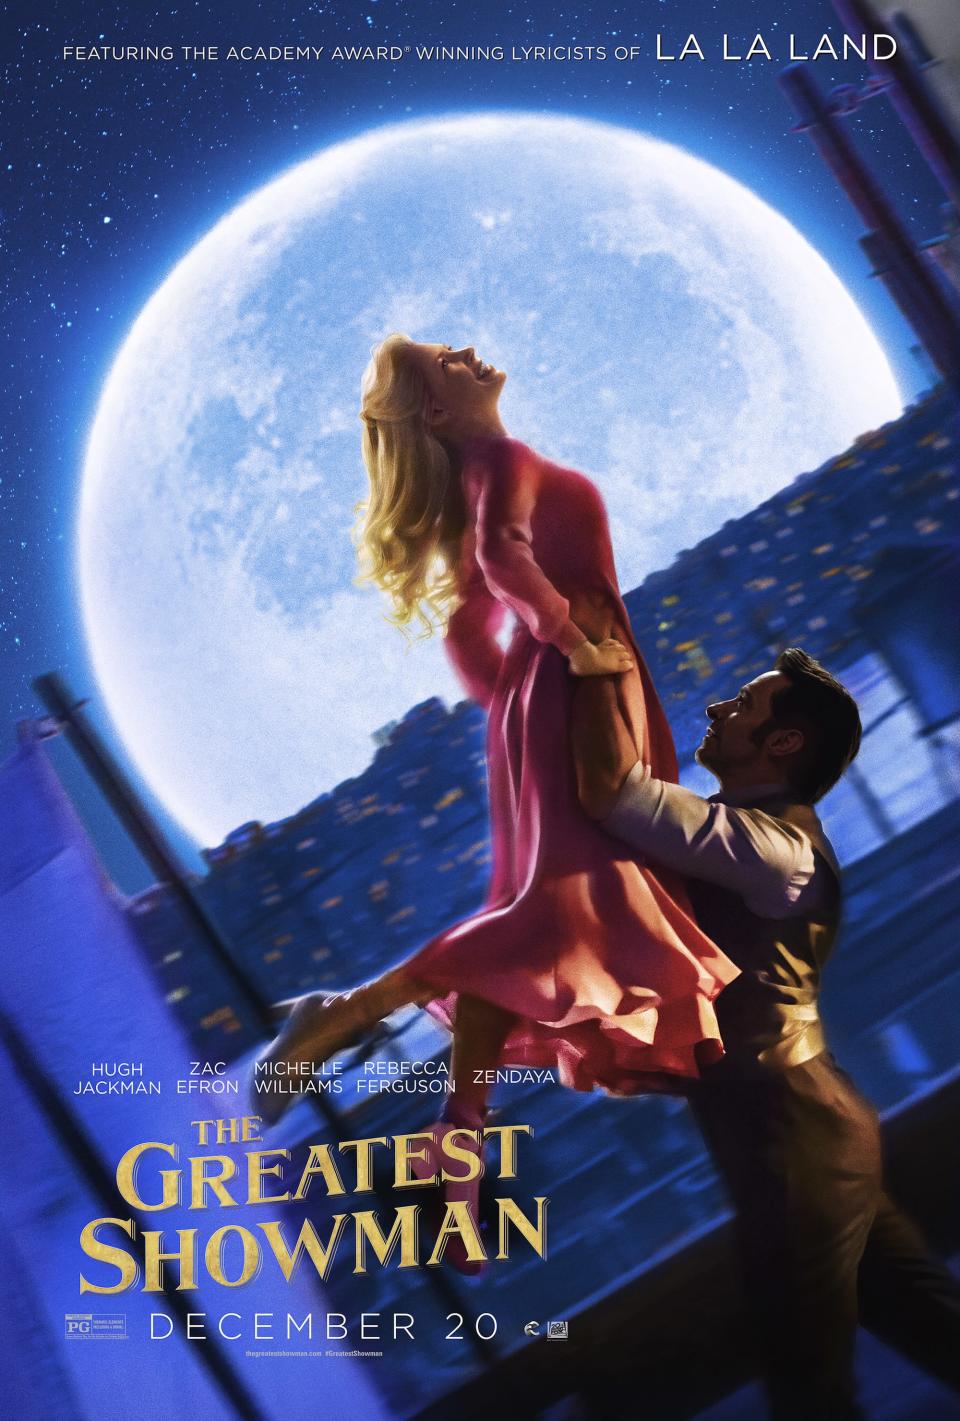 <p>Michelle Williams plays Charity, who leaves her wealthy family to marry the destitute Barnum.<br>(Image: 20th Century Fox) </p>